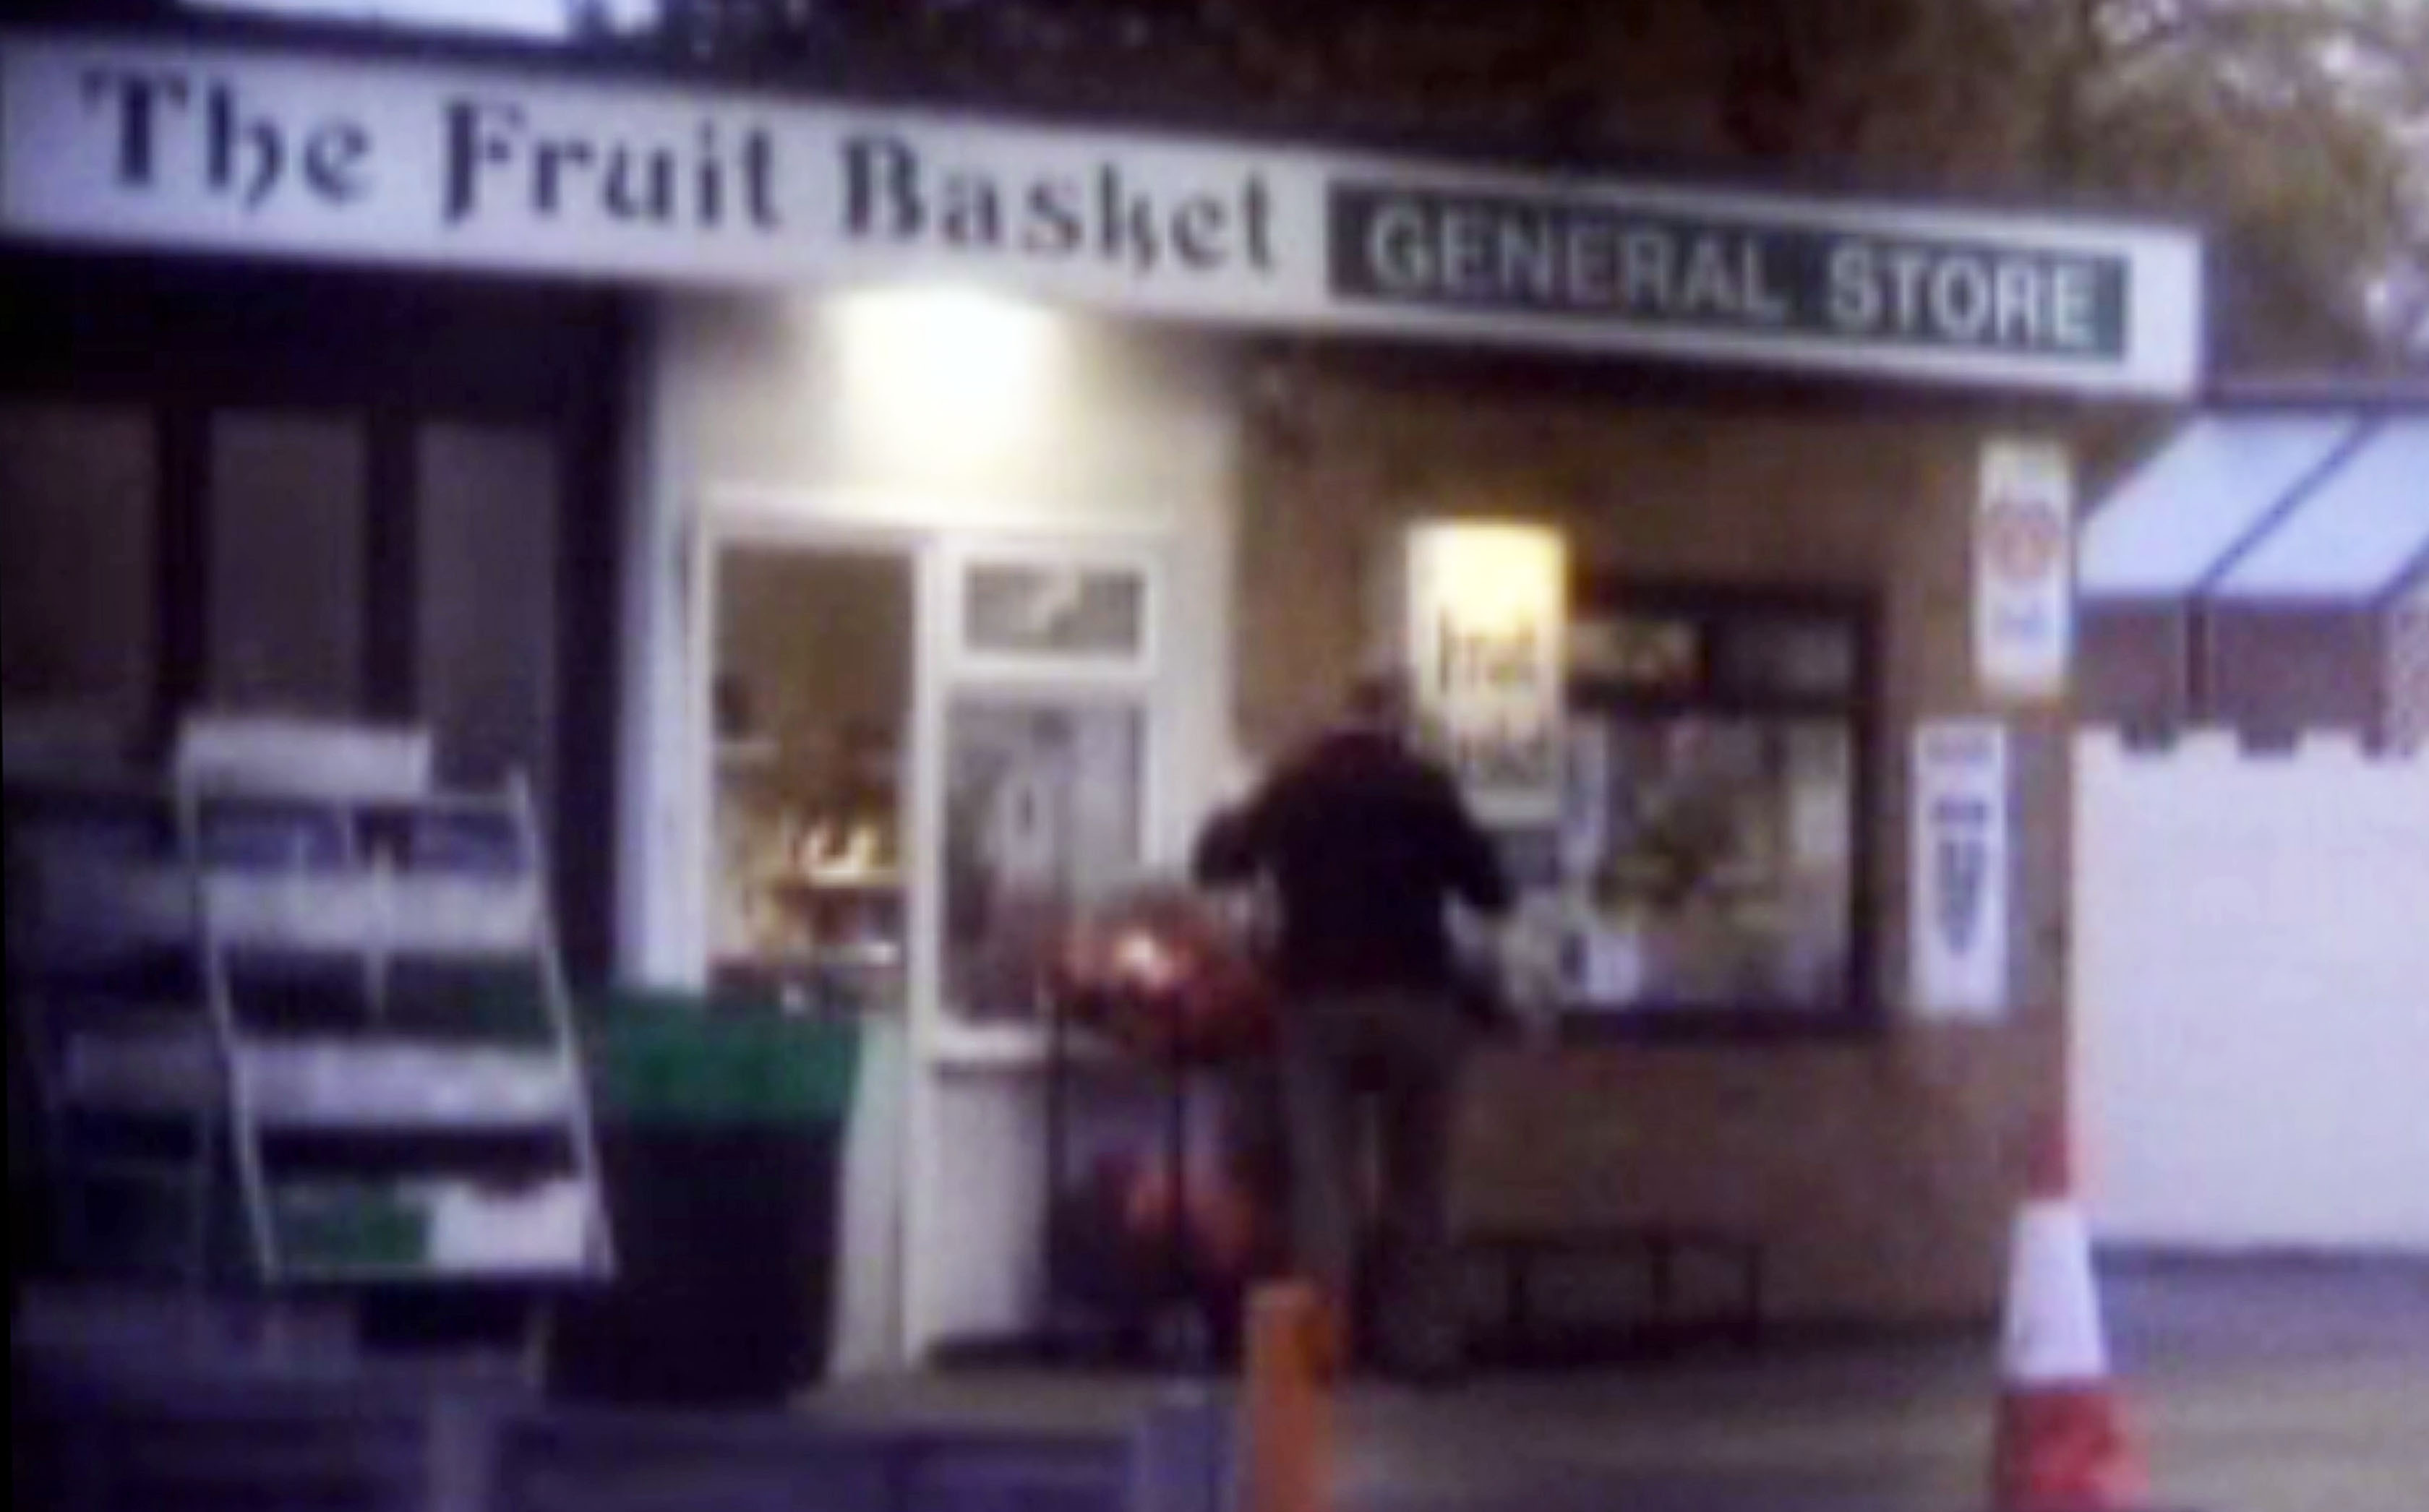 Prize-winning grocer is a benefit cheat